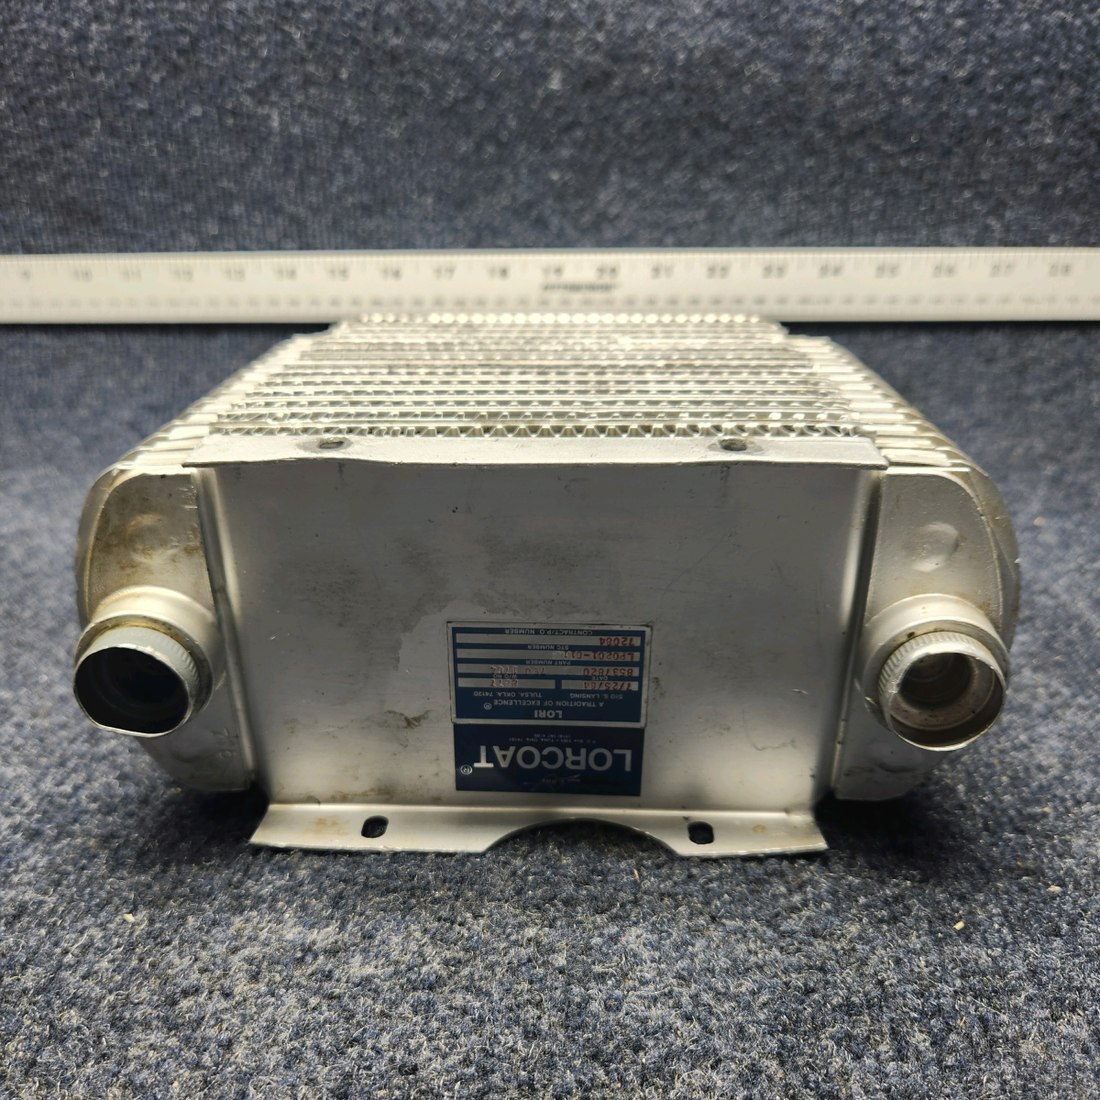 Used aircraft parts for sale, 8537820 Lycoming Textron OIL COOLER ASSEMBLY "SEE PHOTOS"